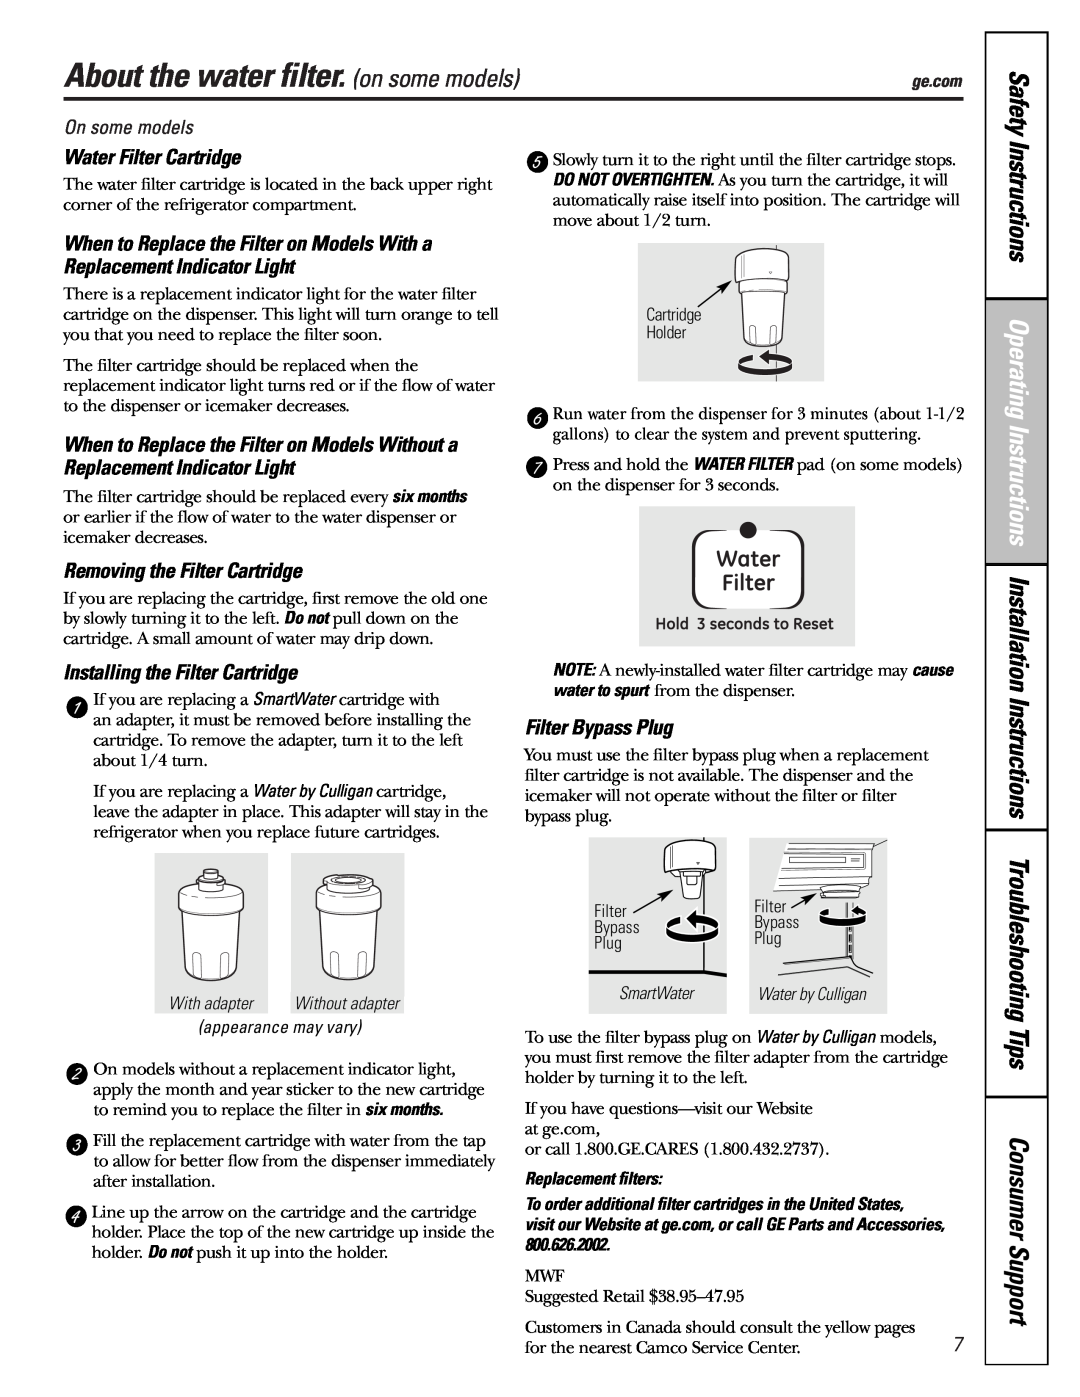 GE MODELS 23 AND 25 About the water filter. on some models, Operating Instructions Installation Instructions, With adapter 